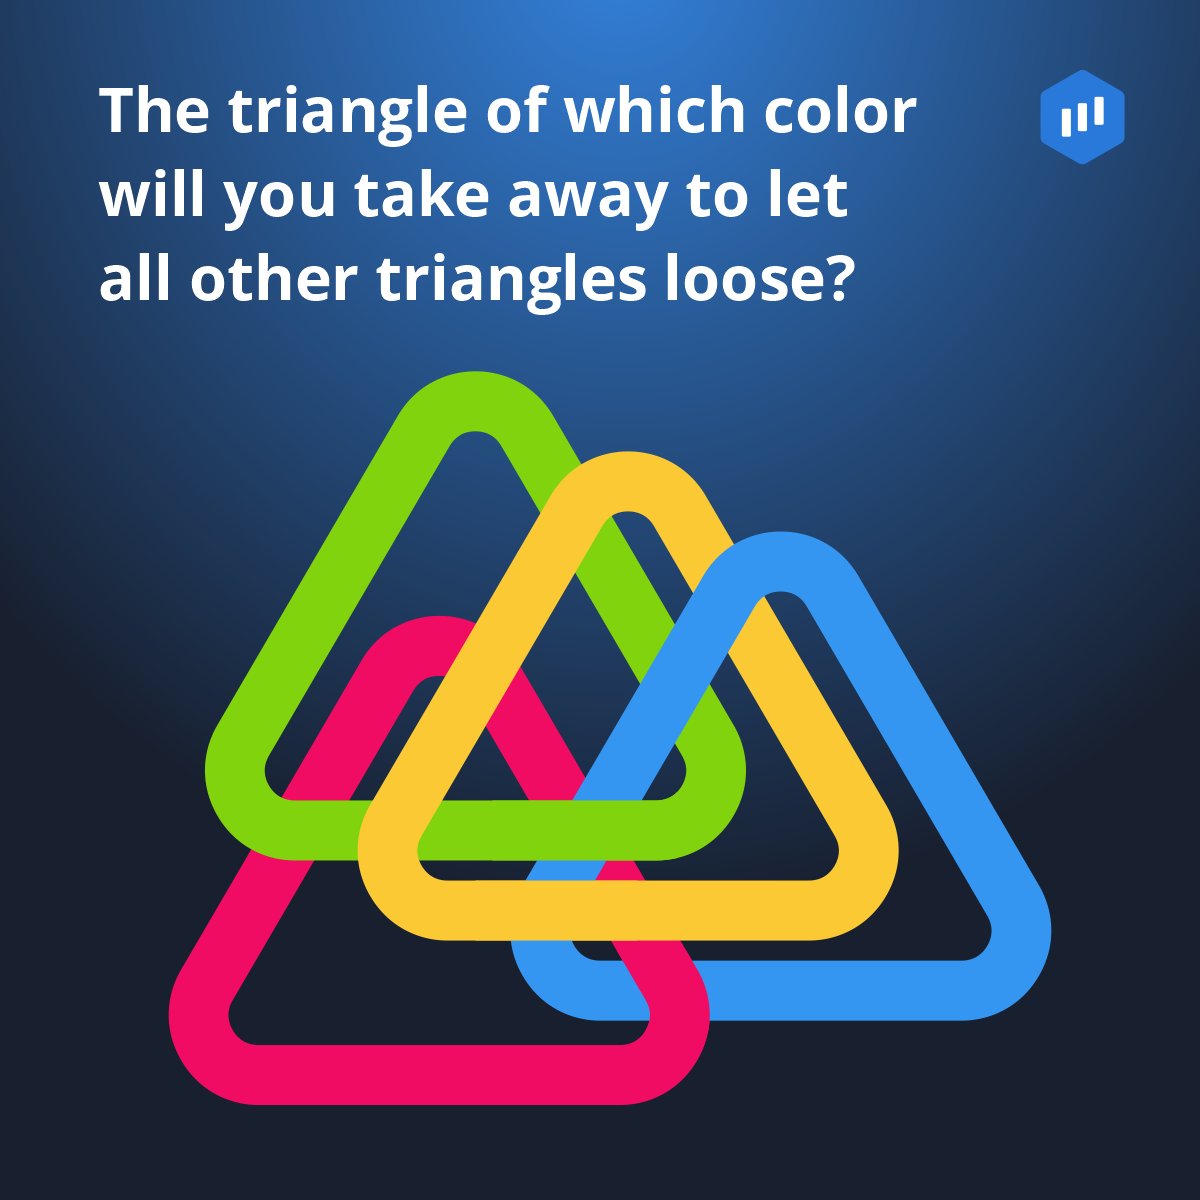 Here’s another Monday brain teaser for you to solve. Can you tell which triangle is holding the rest together? Drop your answers in the comments. Trade with ExpertOption: eo.xyz/bcxf00